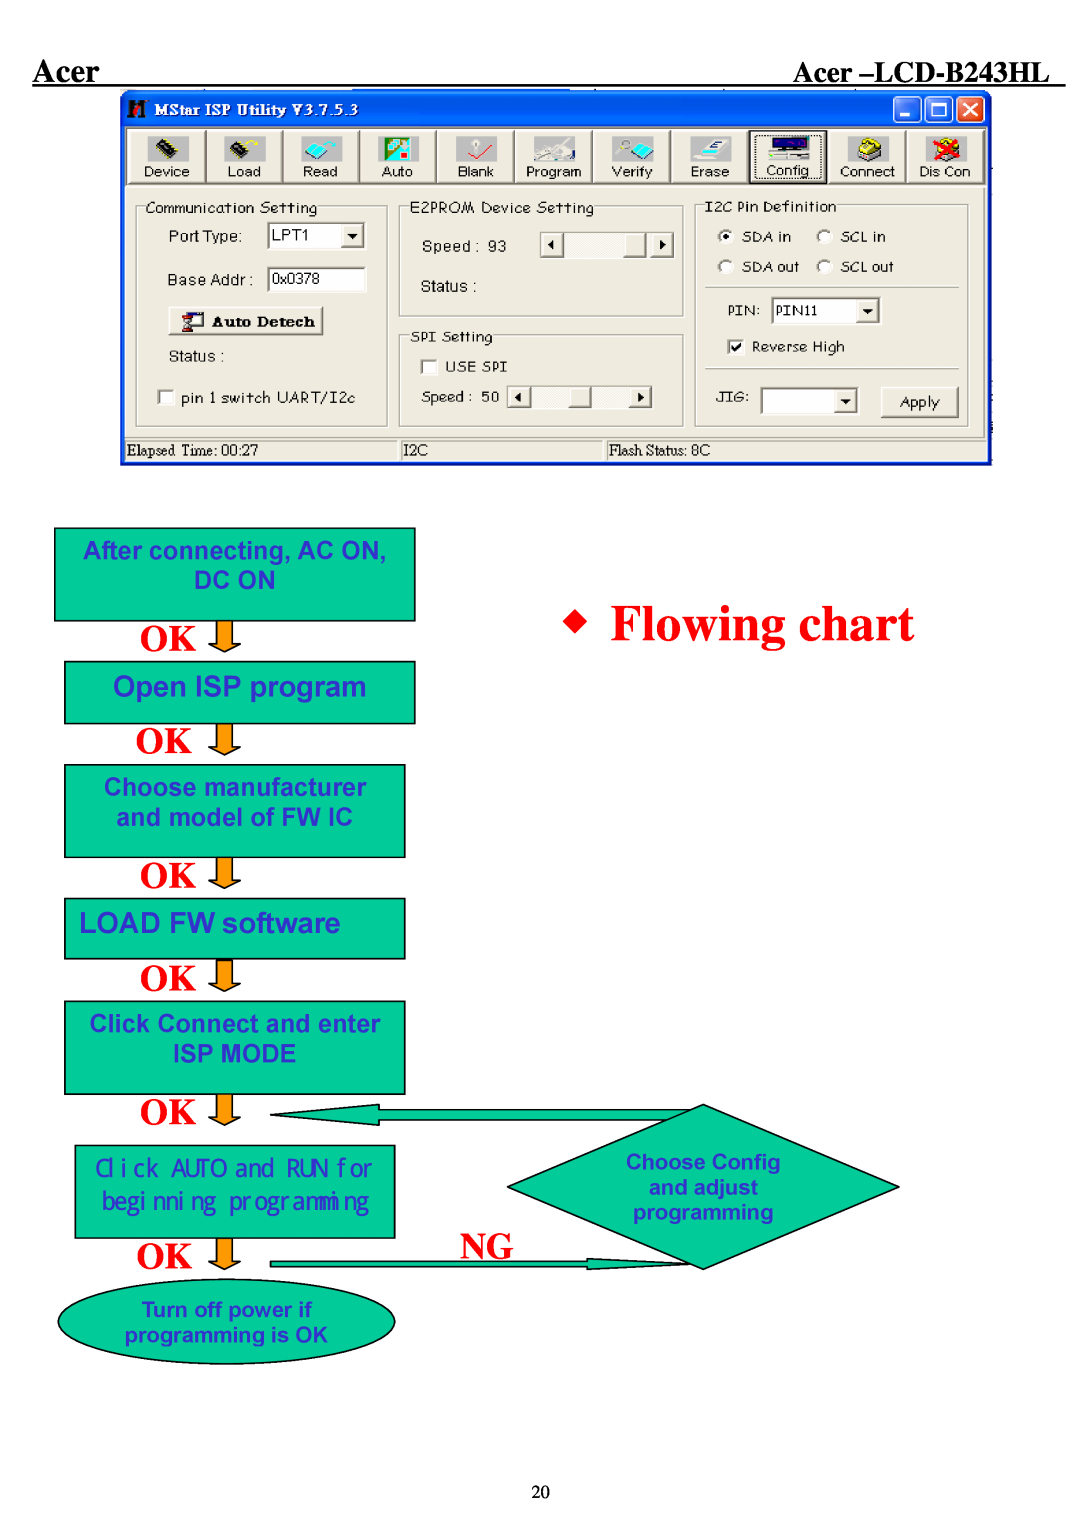 Acer Flowing chart, Acer -LCD-B243HL, Open ISP program, LOAD FW software, After connecting, AC ON DC ON 